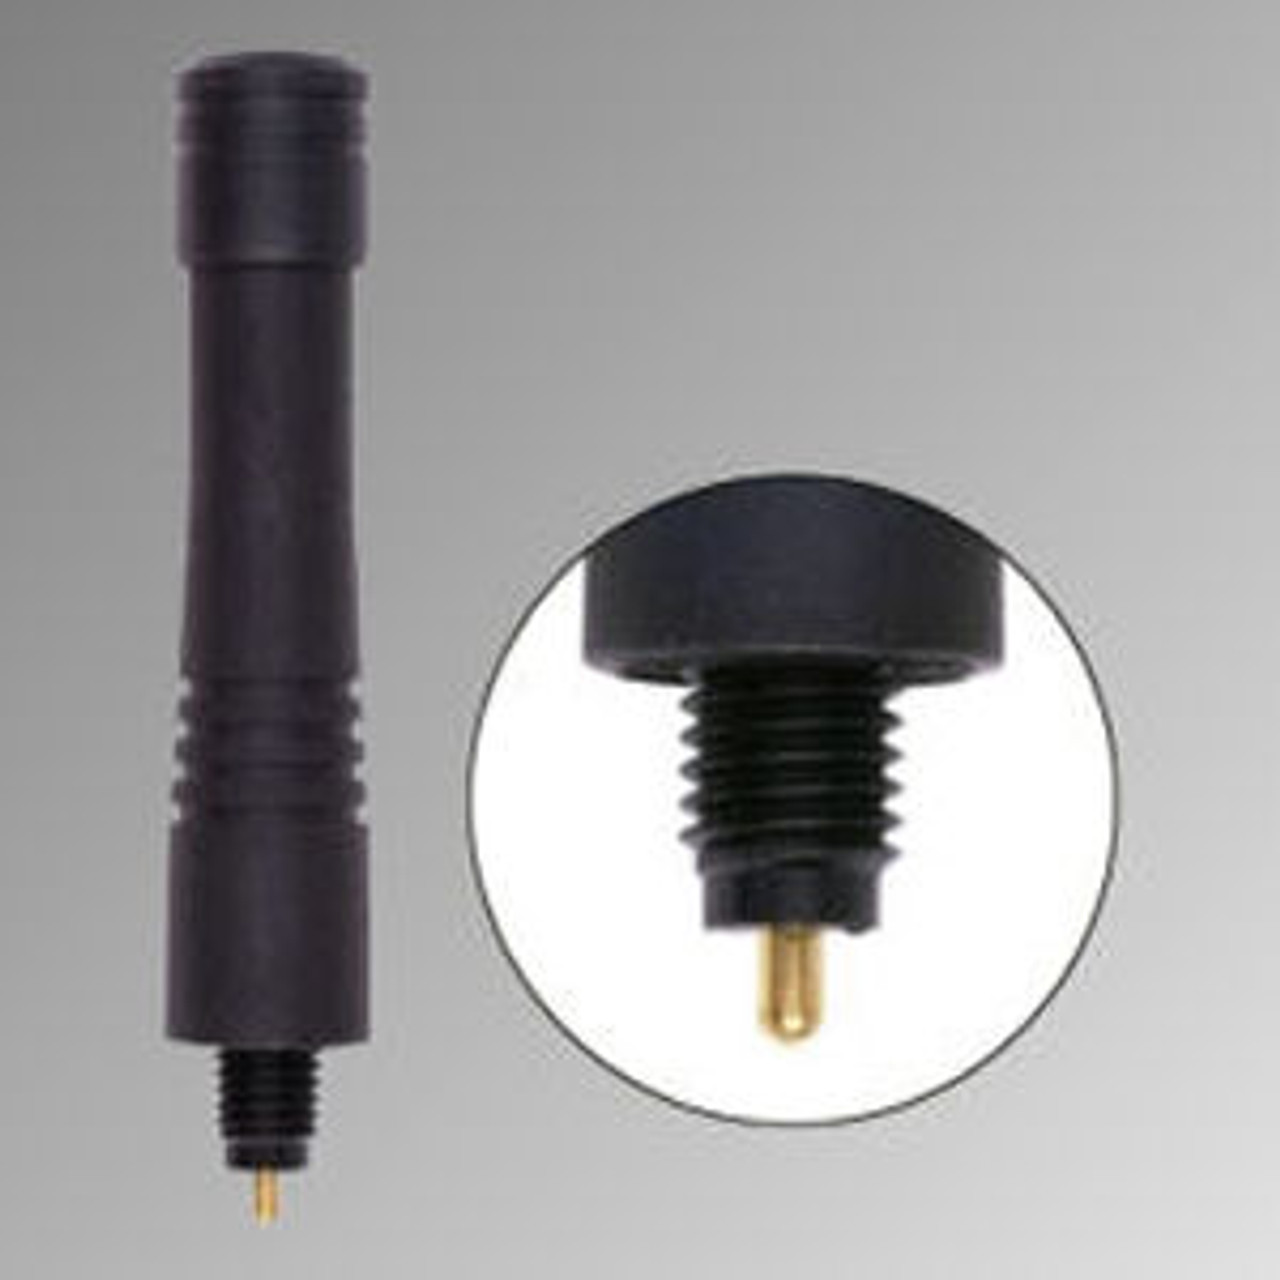 Replacement For M/A-Com KRE1011219/9 Antenna - 3", UHF, 400-420 MHz